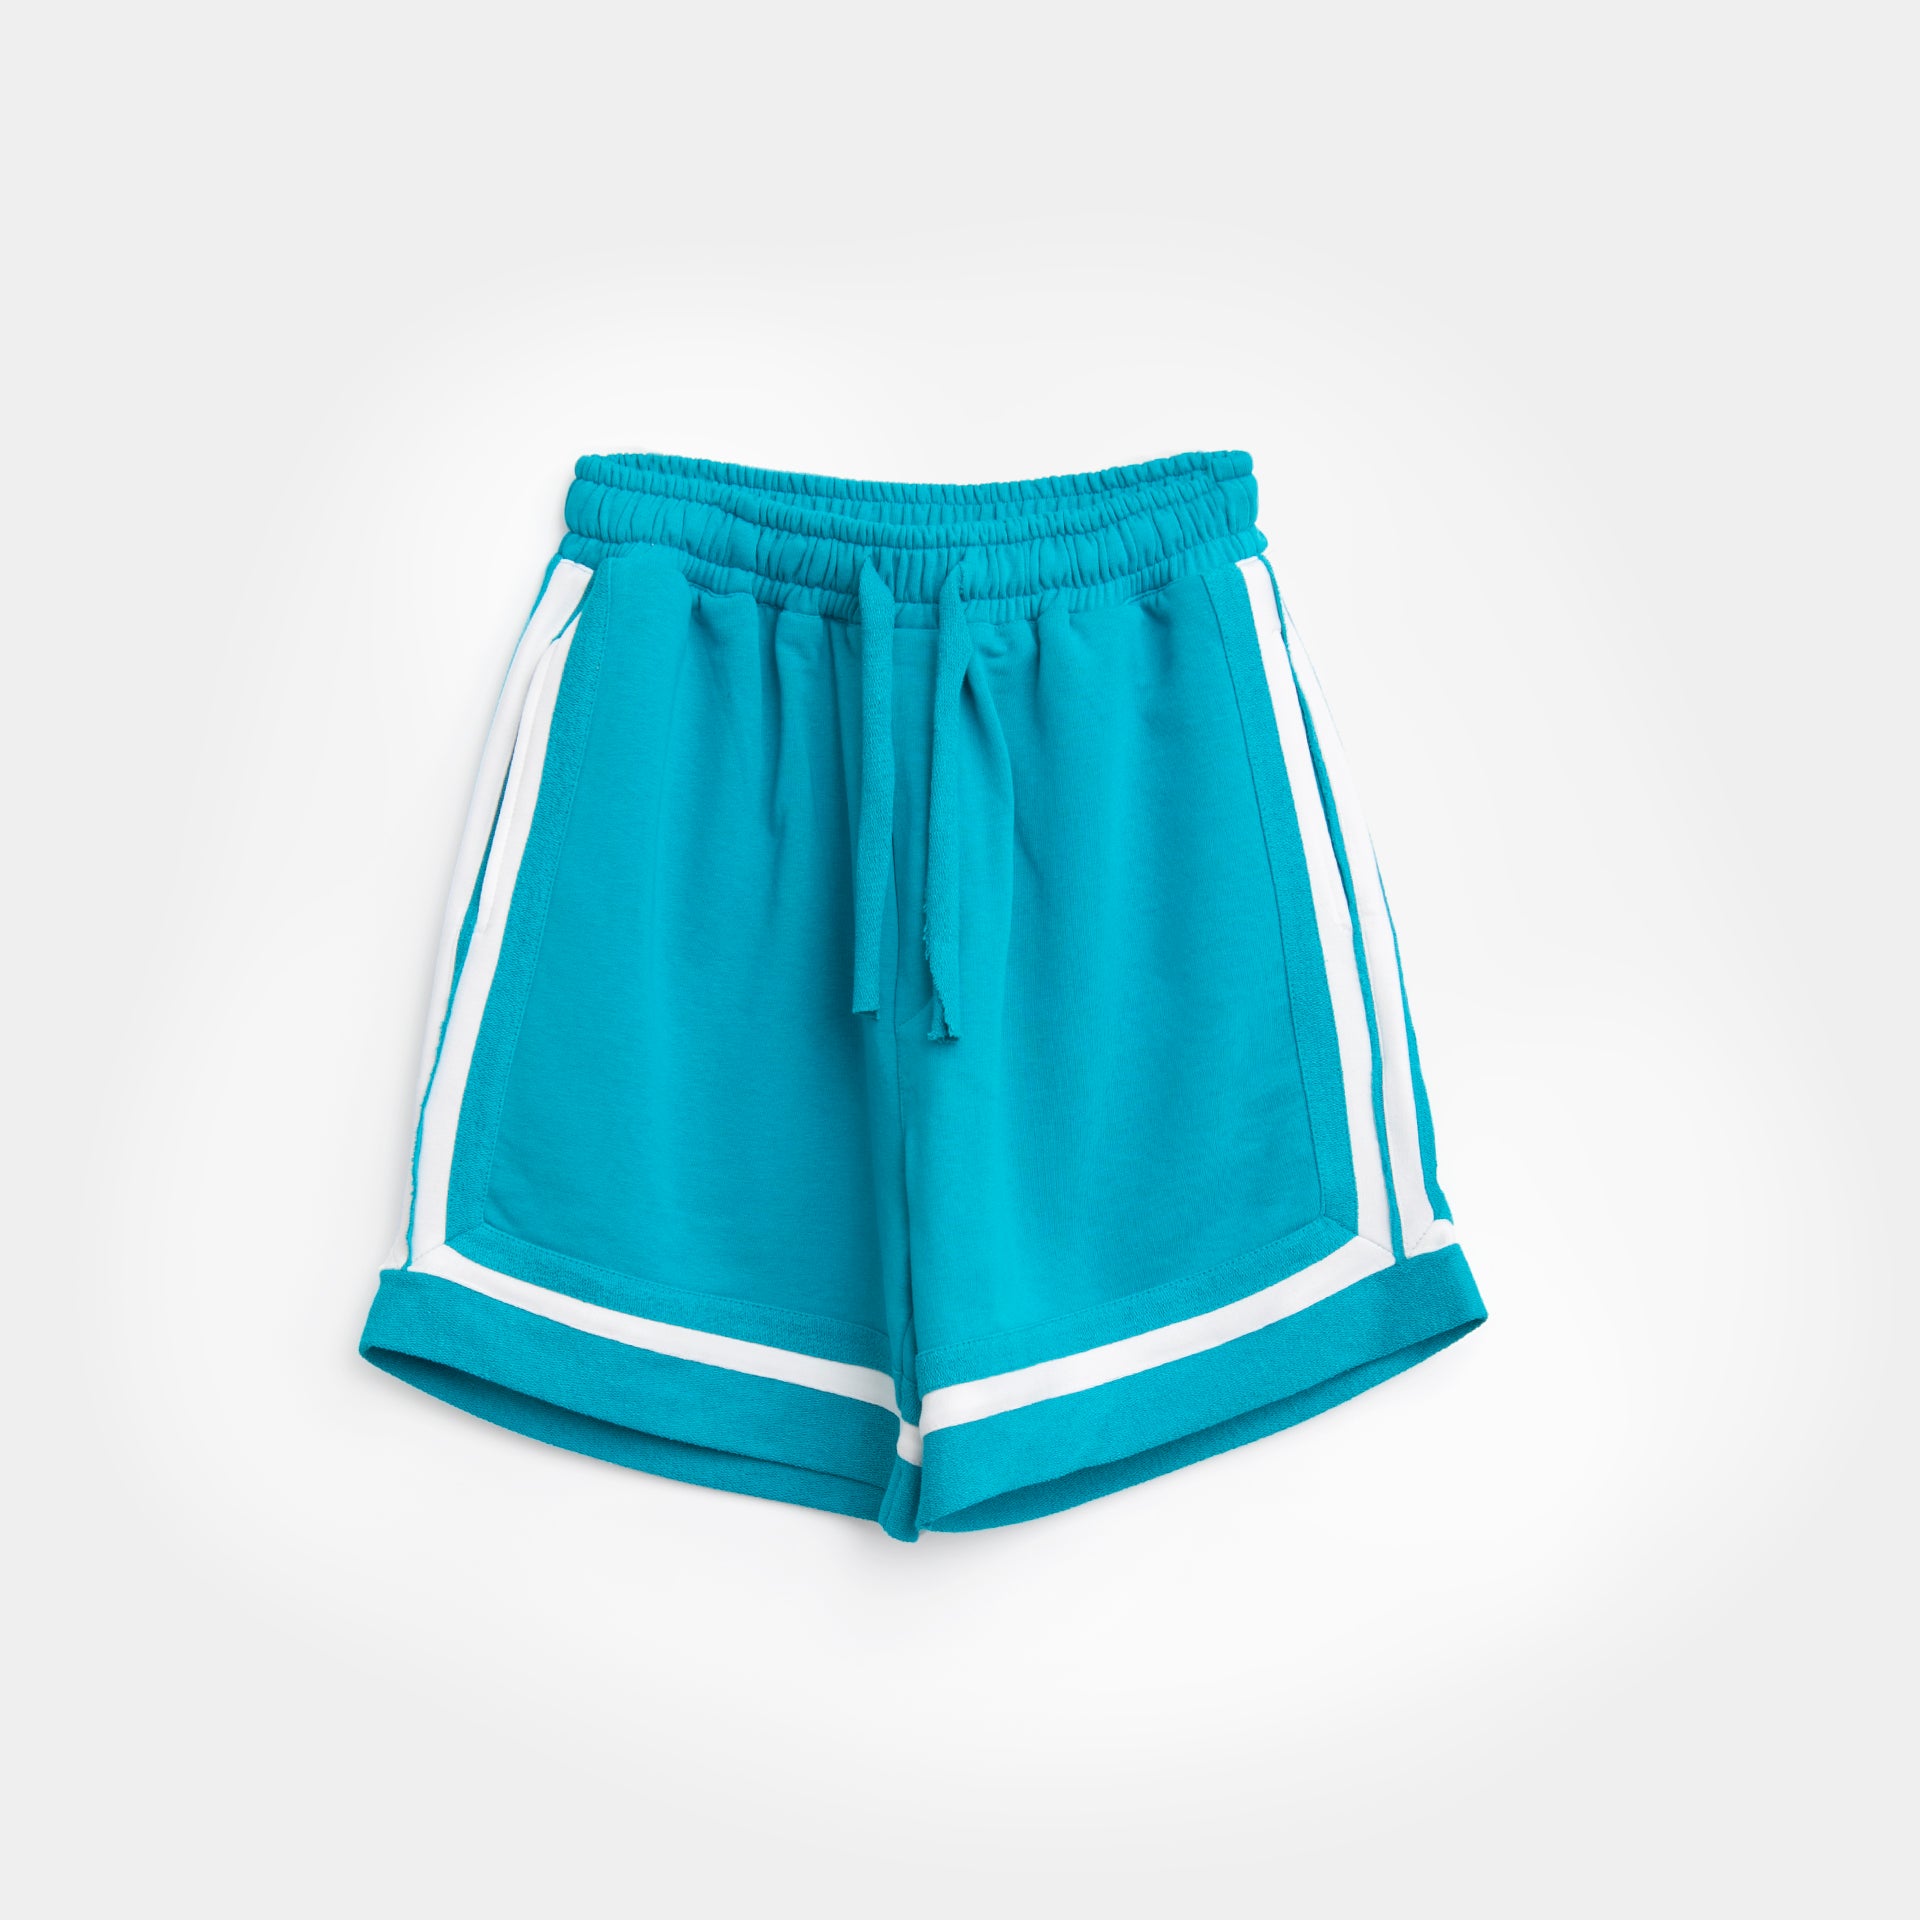 Turquoise Shorts With White Stripes By S32